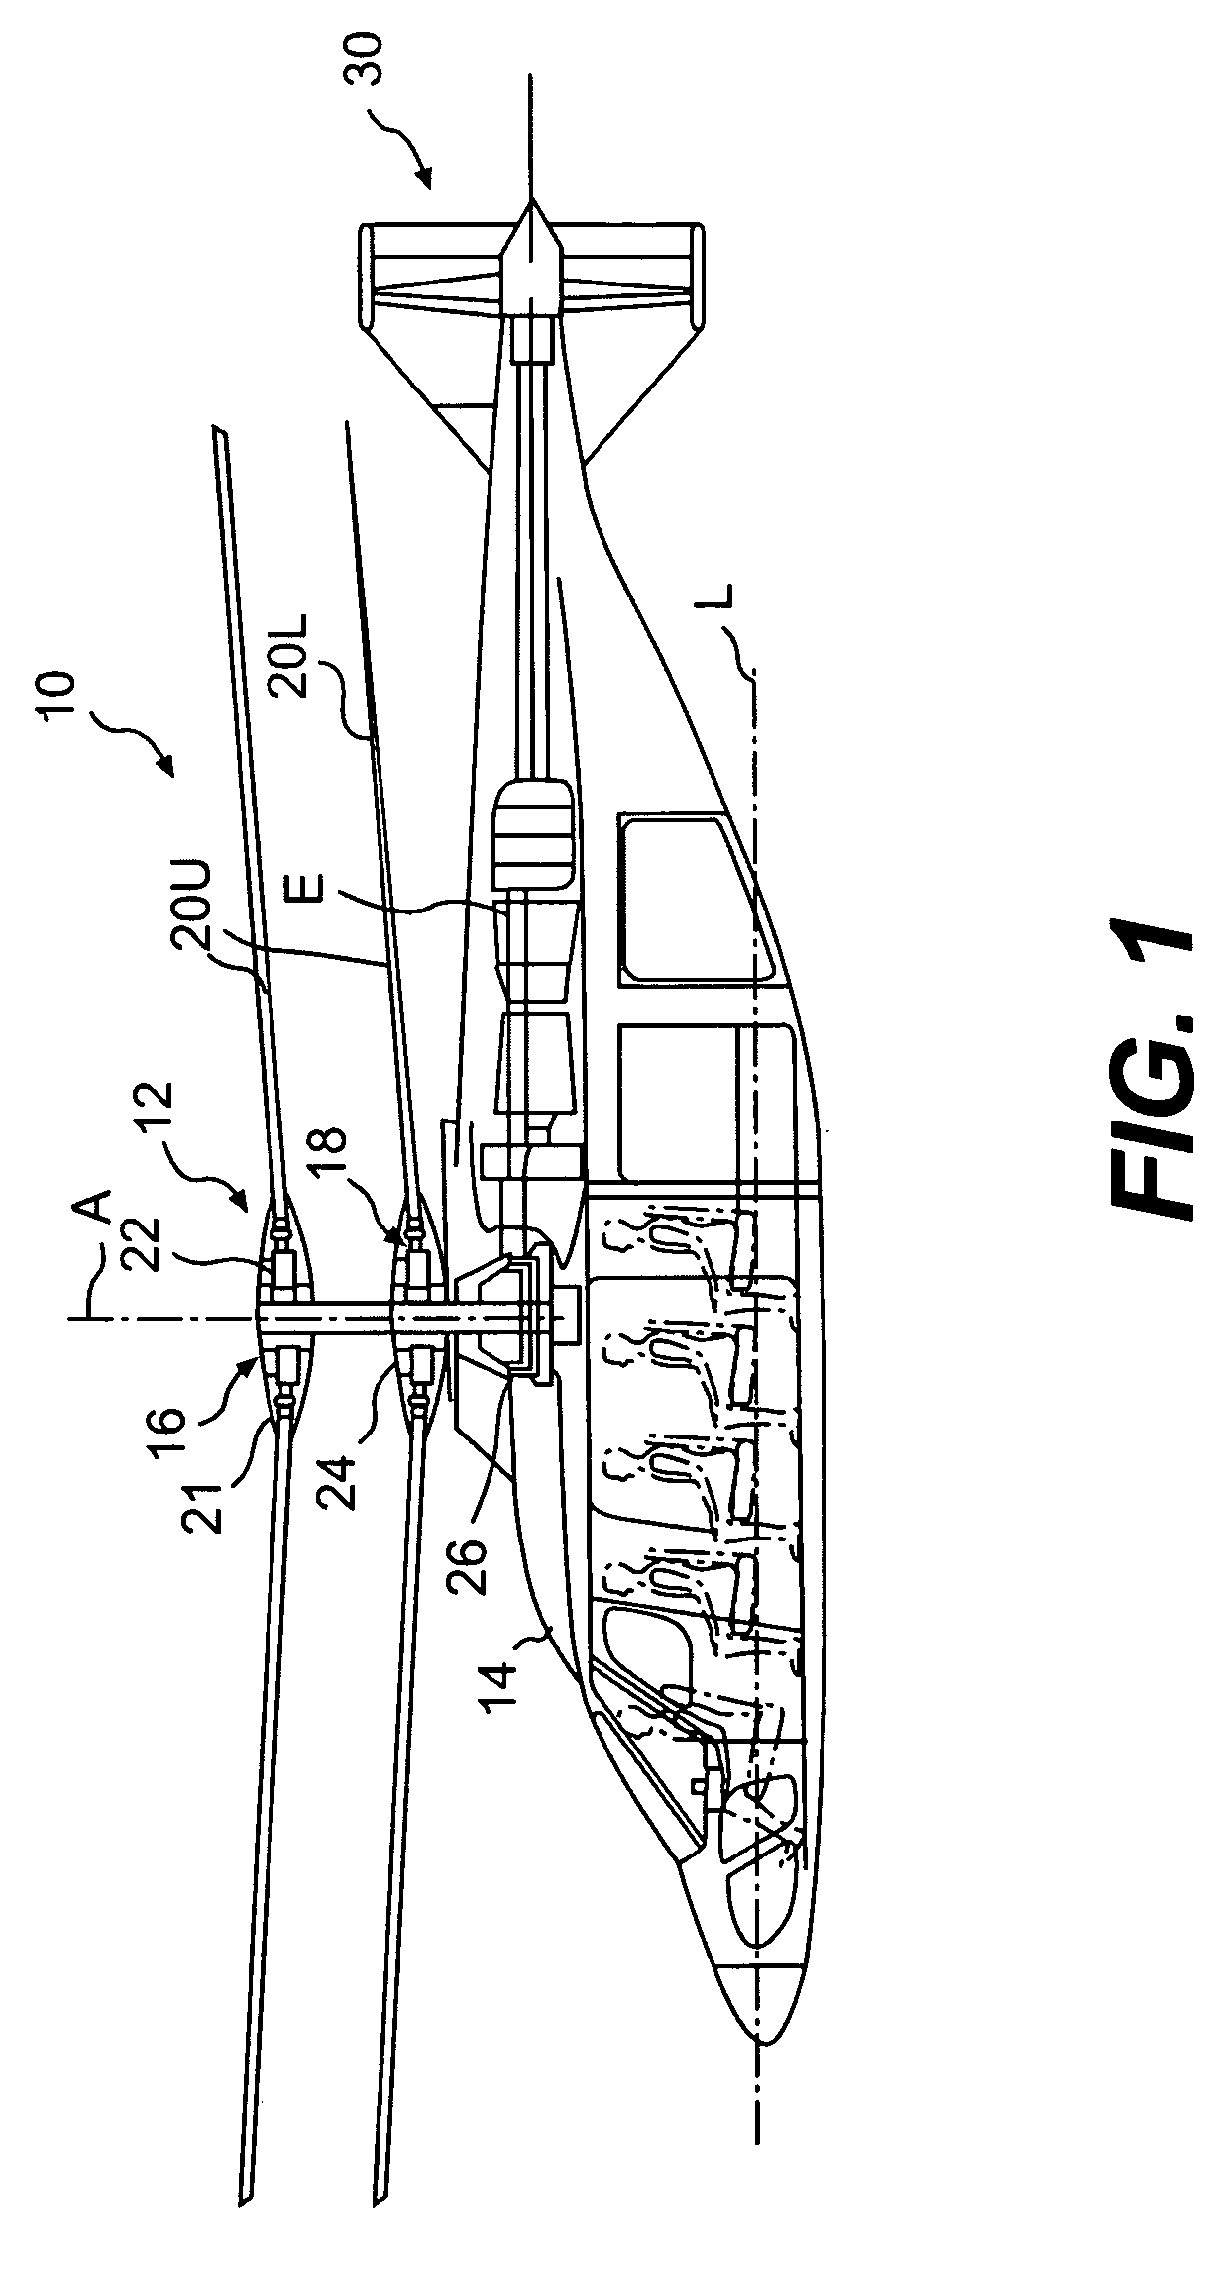 Rotor blade twist distribution for a high speed rotary-wing aircraft